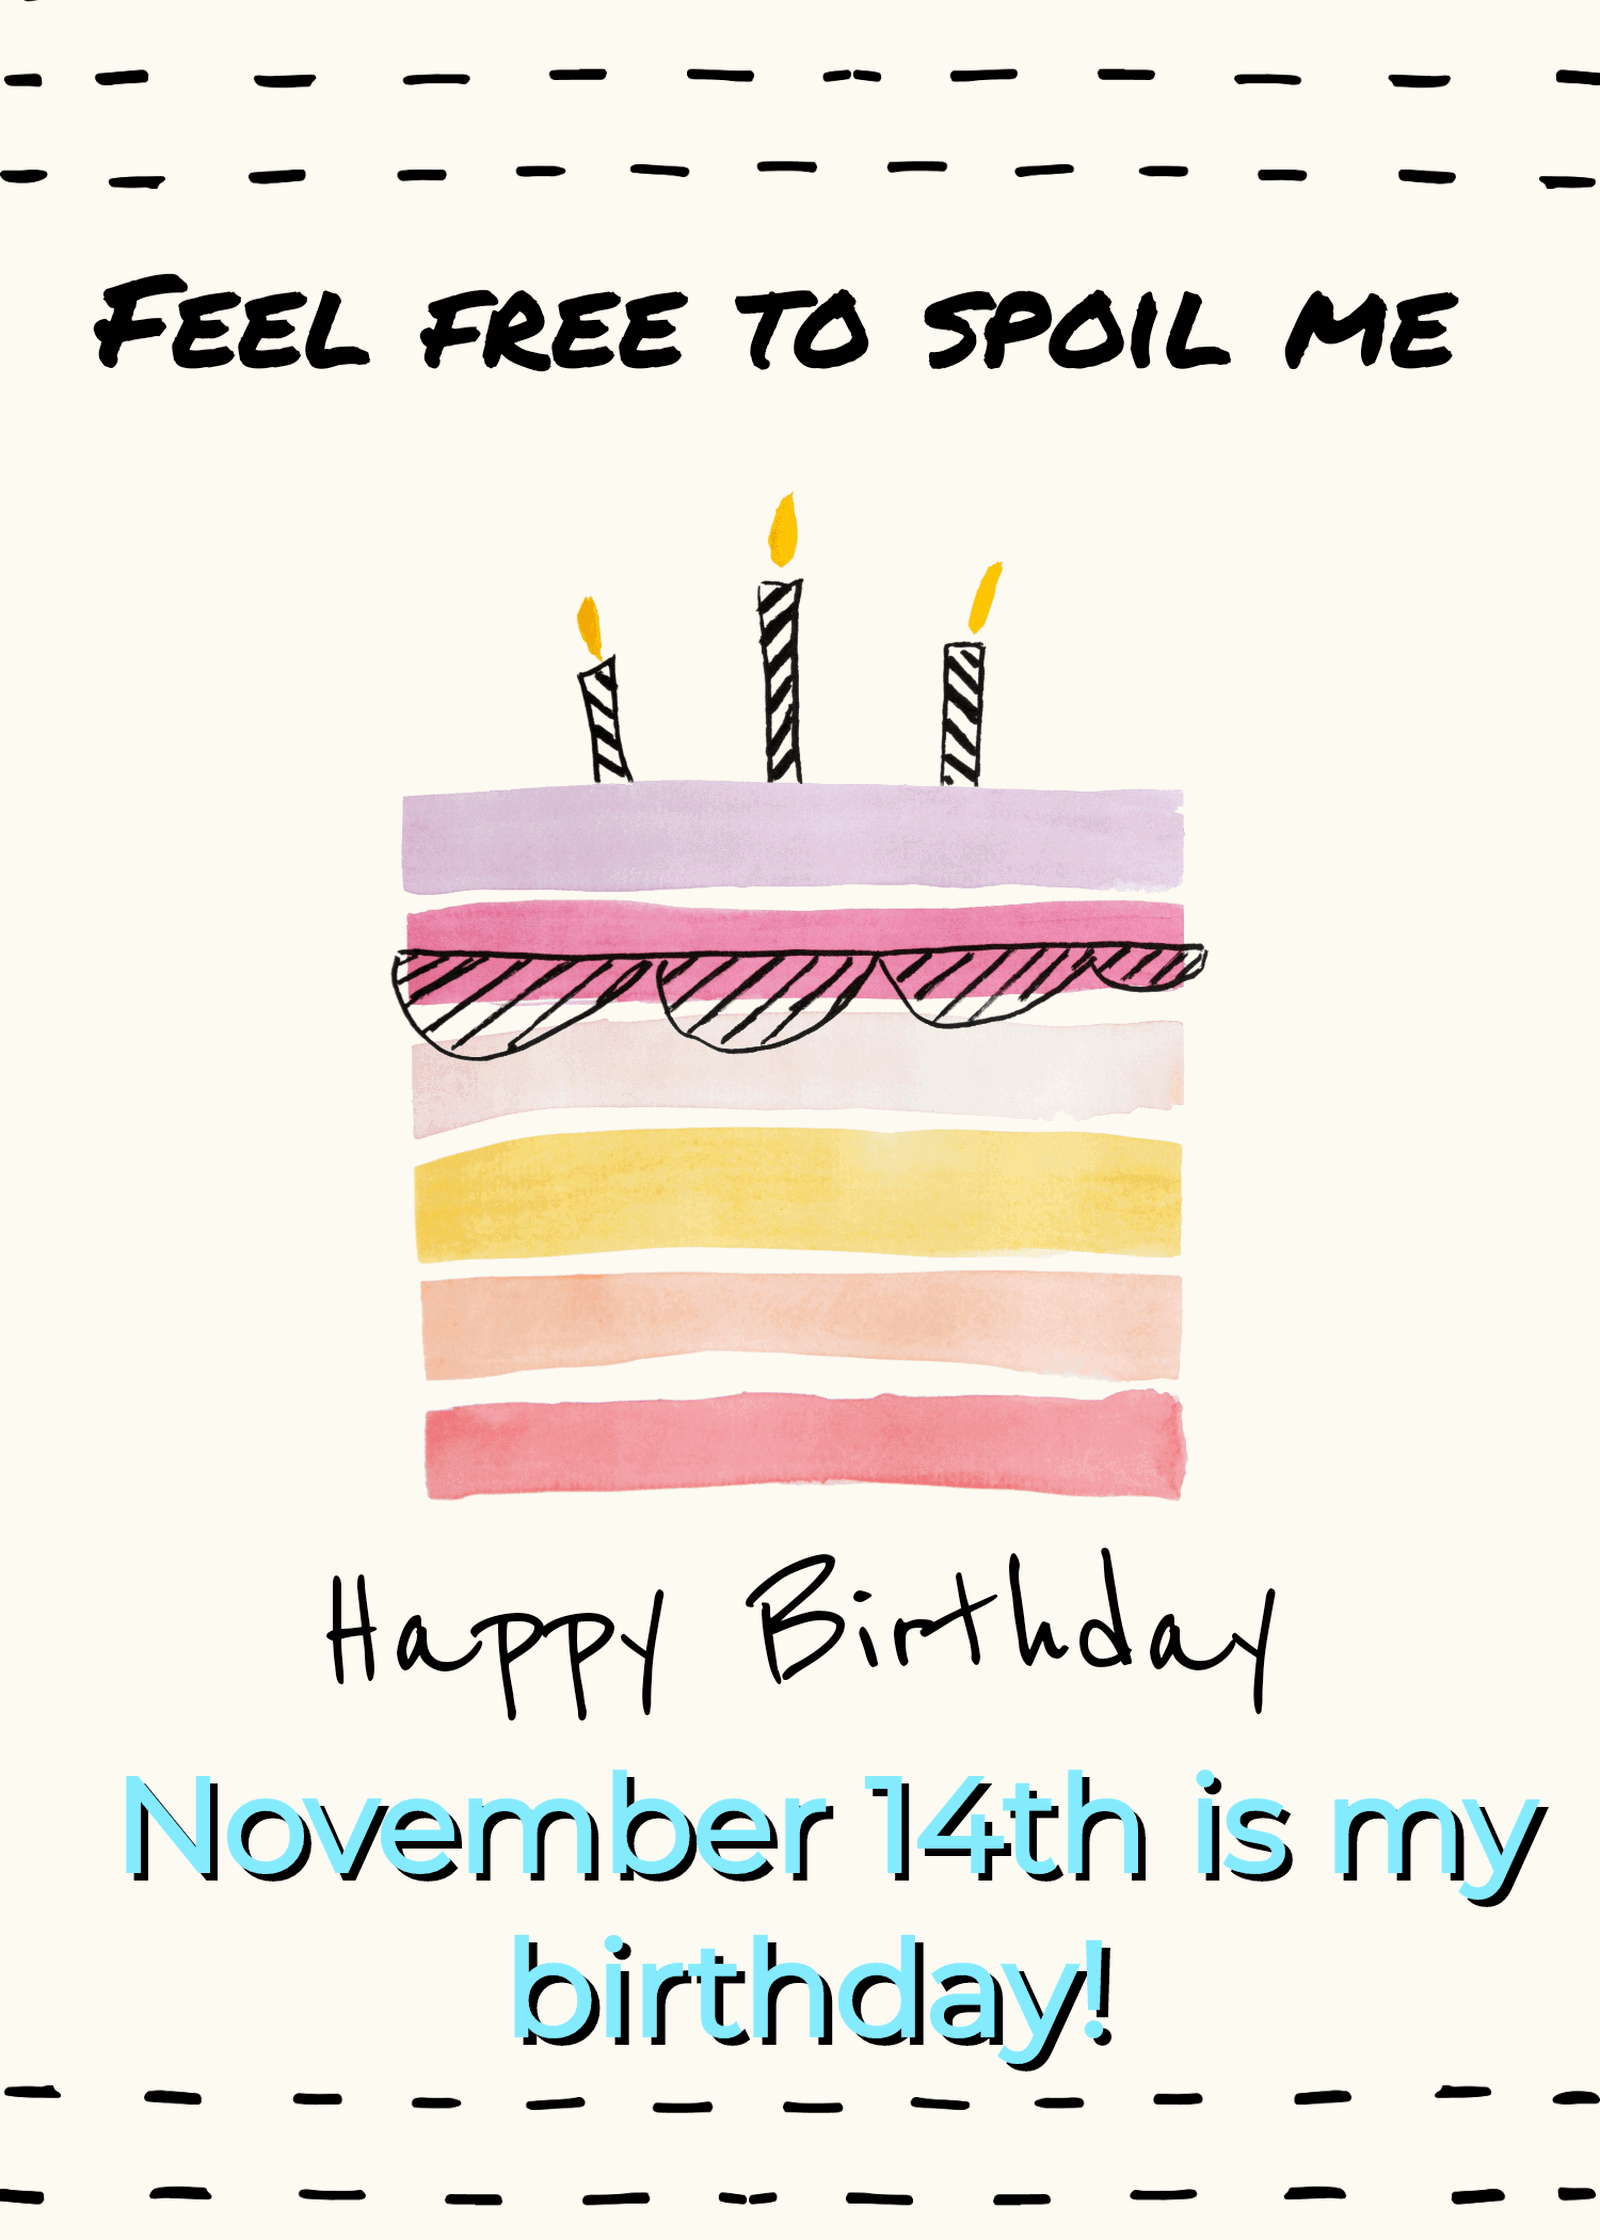 Photo by SpicedEnterprise with the username @spicesophia, who is a star user,  November 3, 2023 at 5:04 AM and the text says 'It's my birthday month!! 12 days and counting! Let's have a bunch of fun this month!!

My wishlist: https://www.amazon.com/hz/wishlist/ls/3PDSEUO1GEXC1?ref_=wl_share

My links: https://click.xpurity.co/9aaucw0kv3'